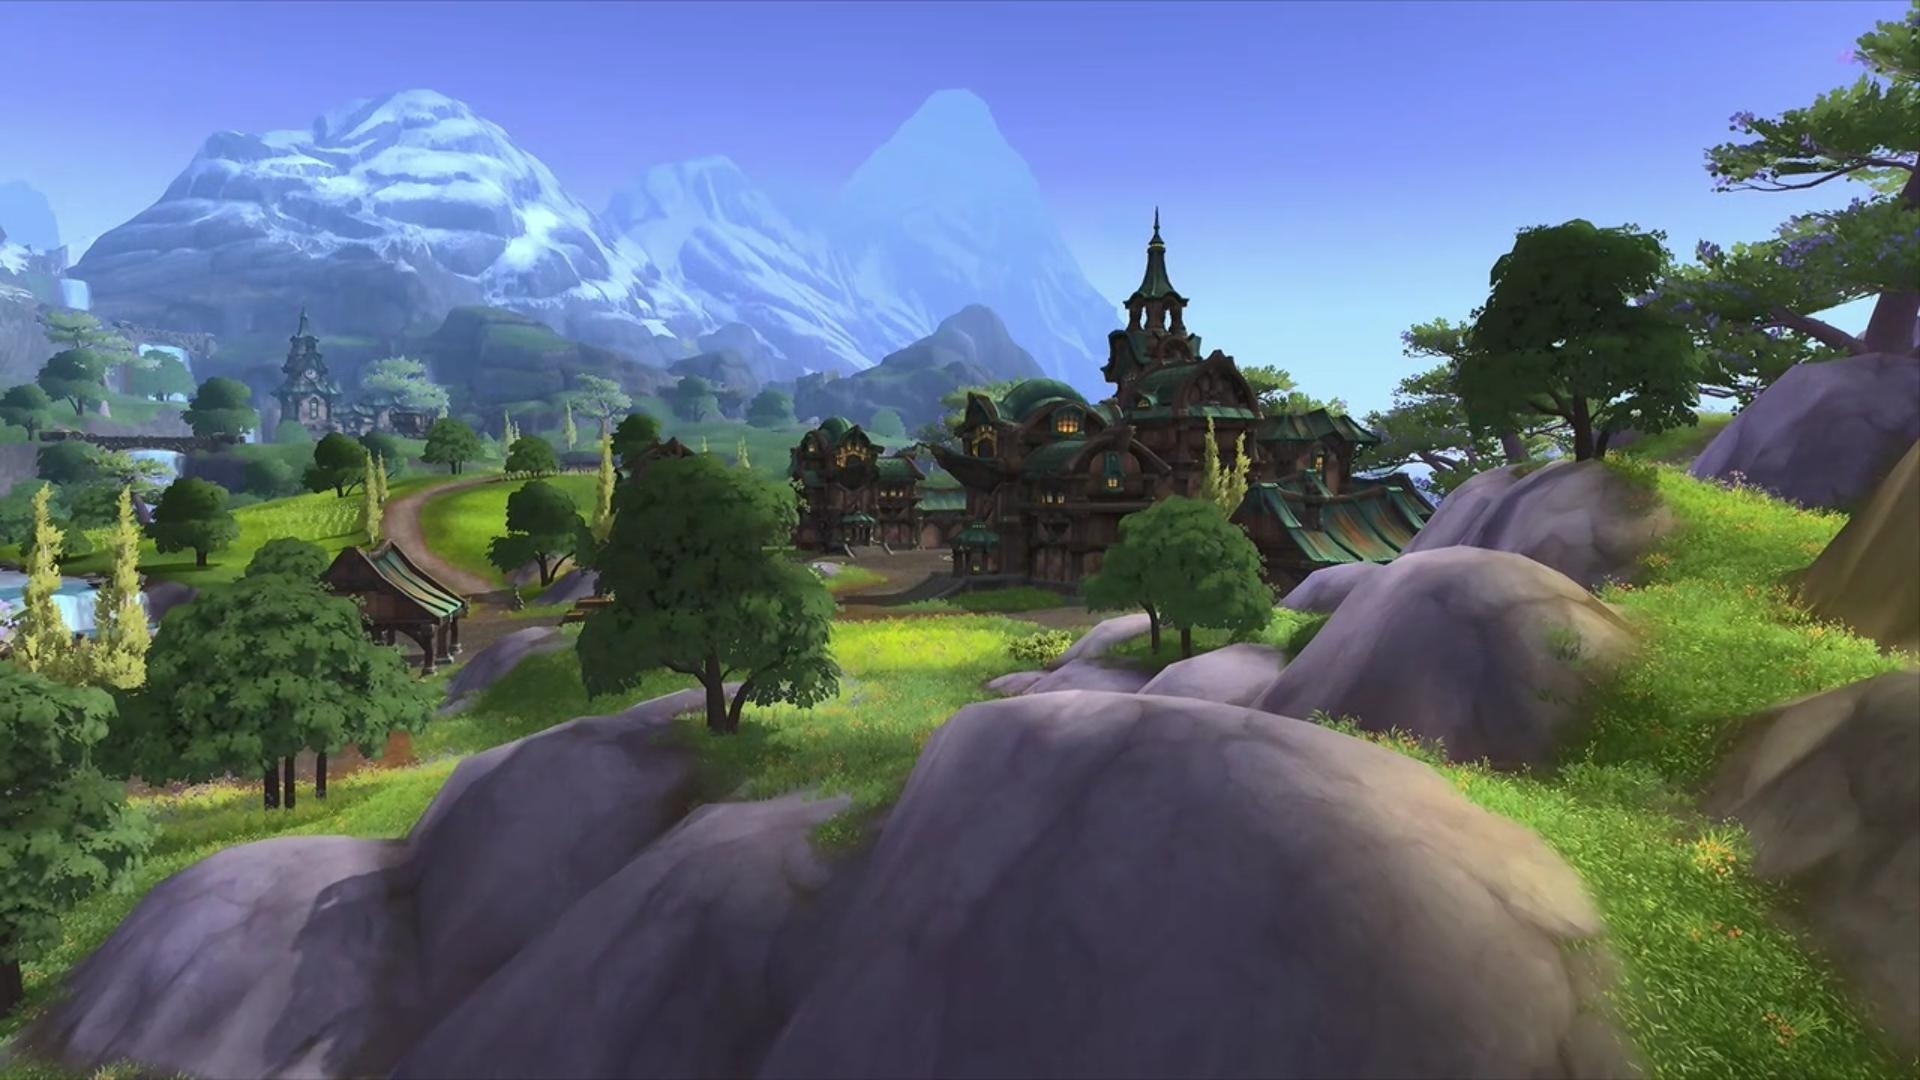 Battle for Azeroth World Quest Emissary Rewards and Factions - News